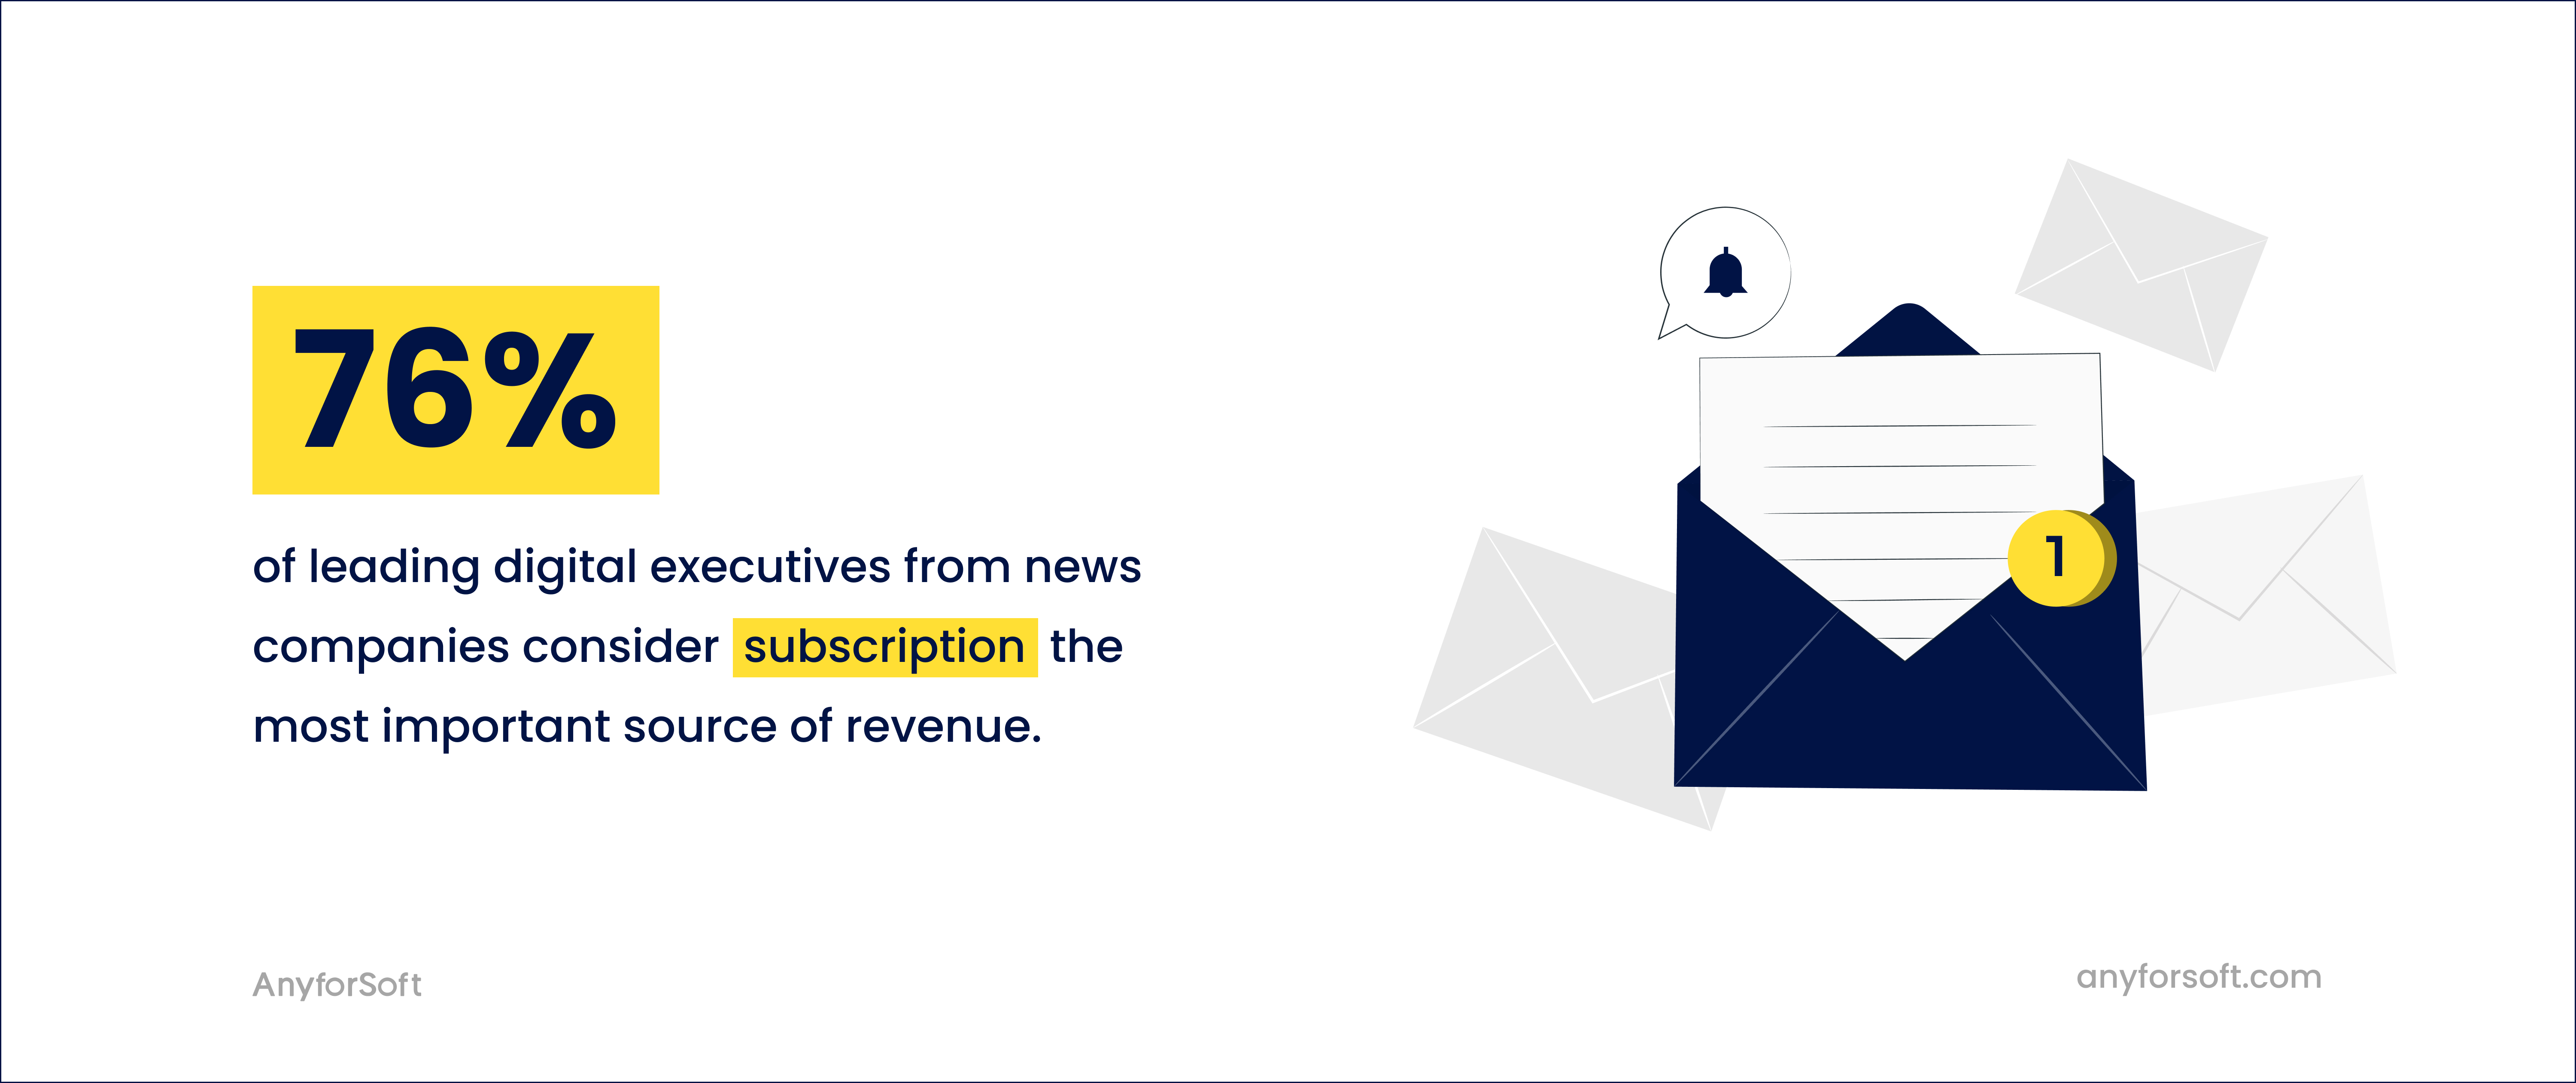 Subscription is the most important source of revenue